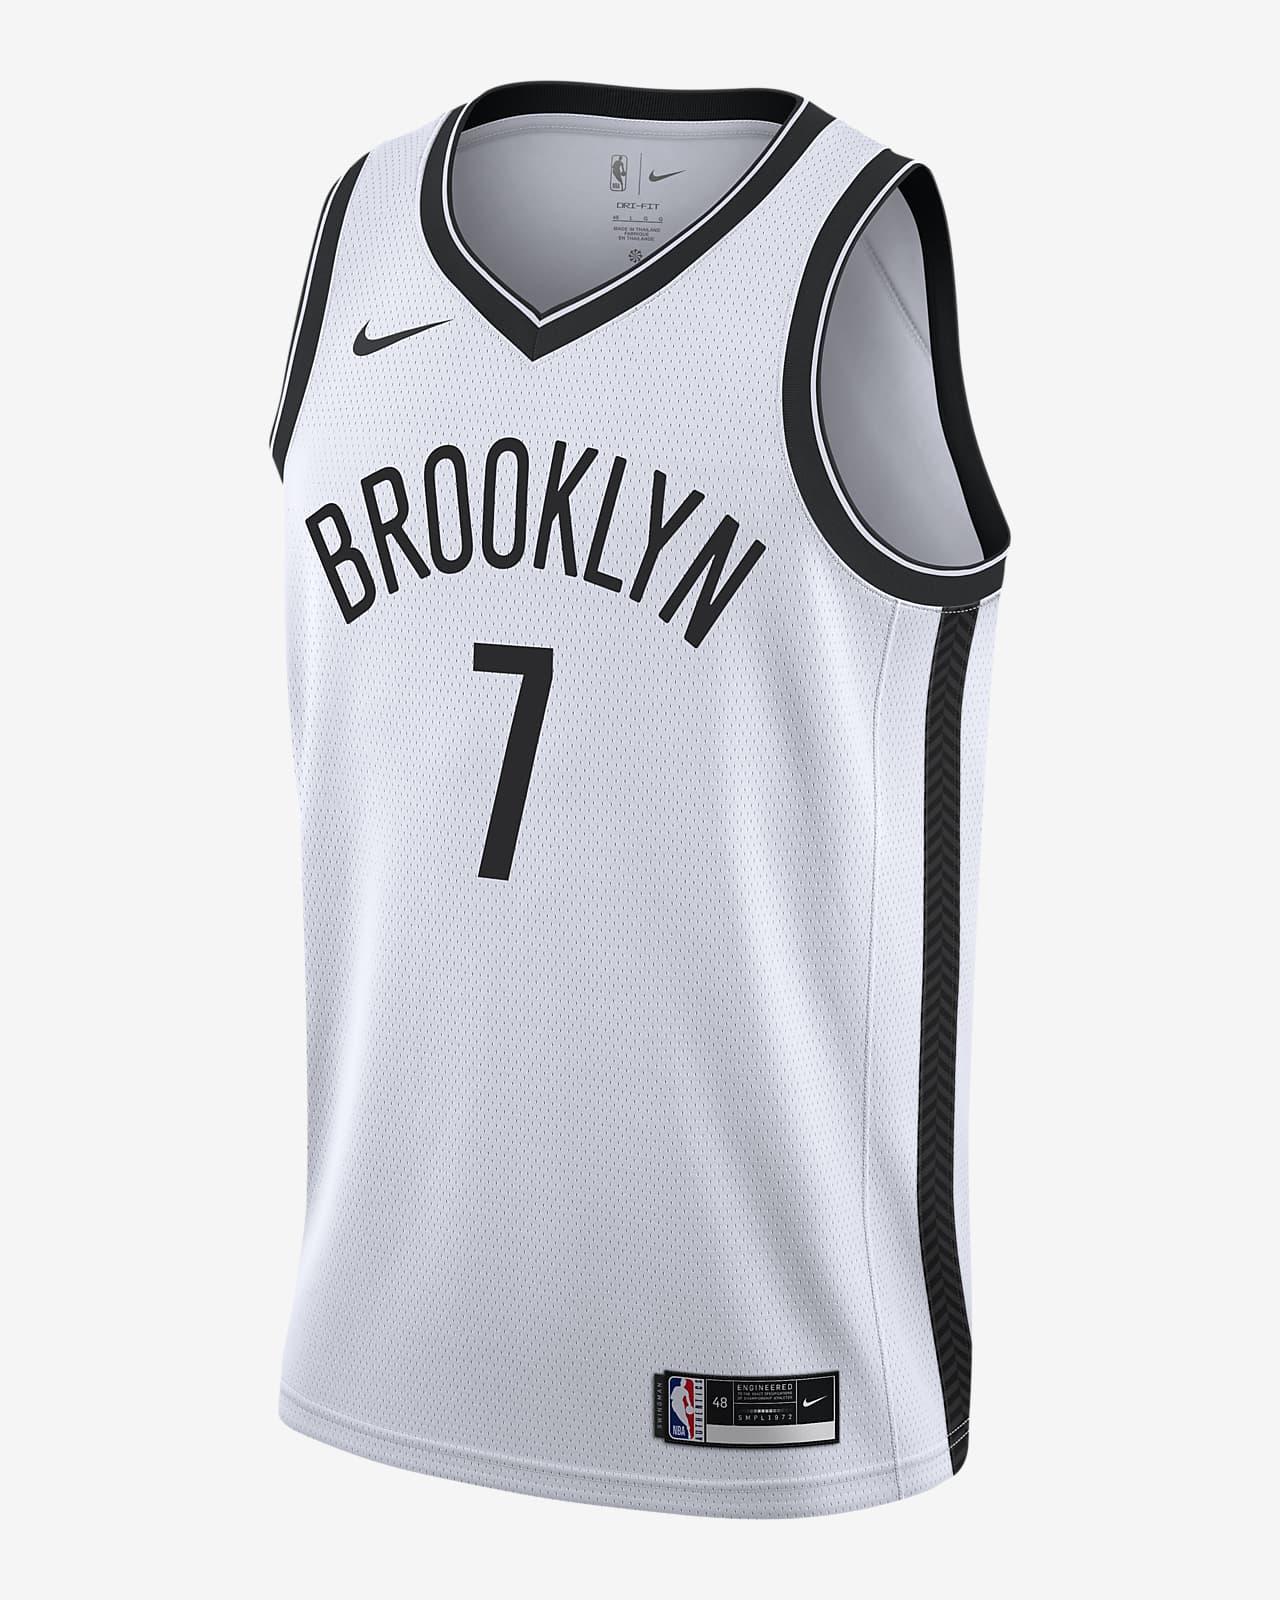 Kevin Durant Nets City Jersey / Nike Shirts 22 Brooklyn Nets Kevin ...